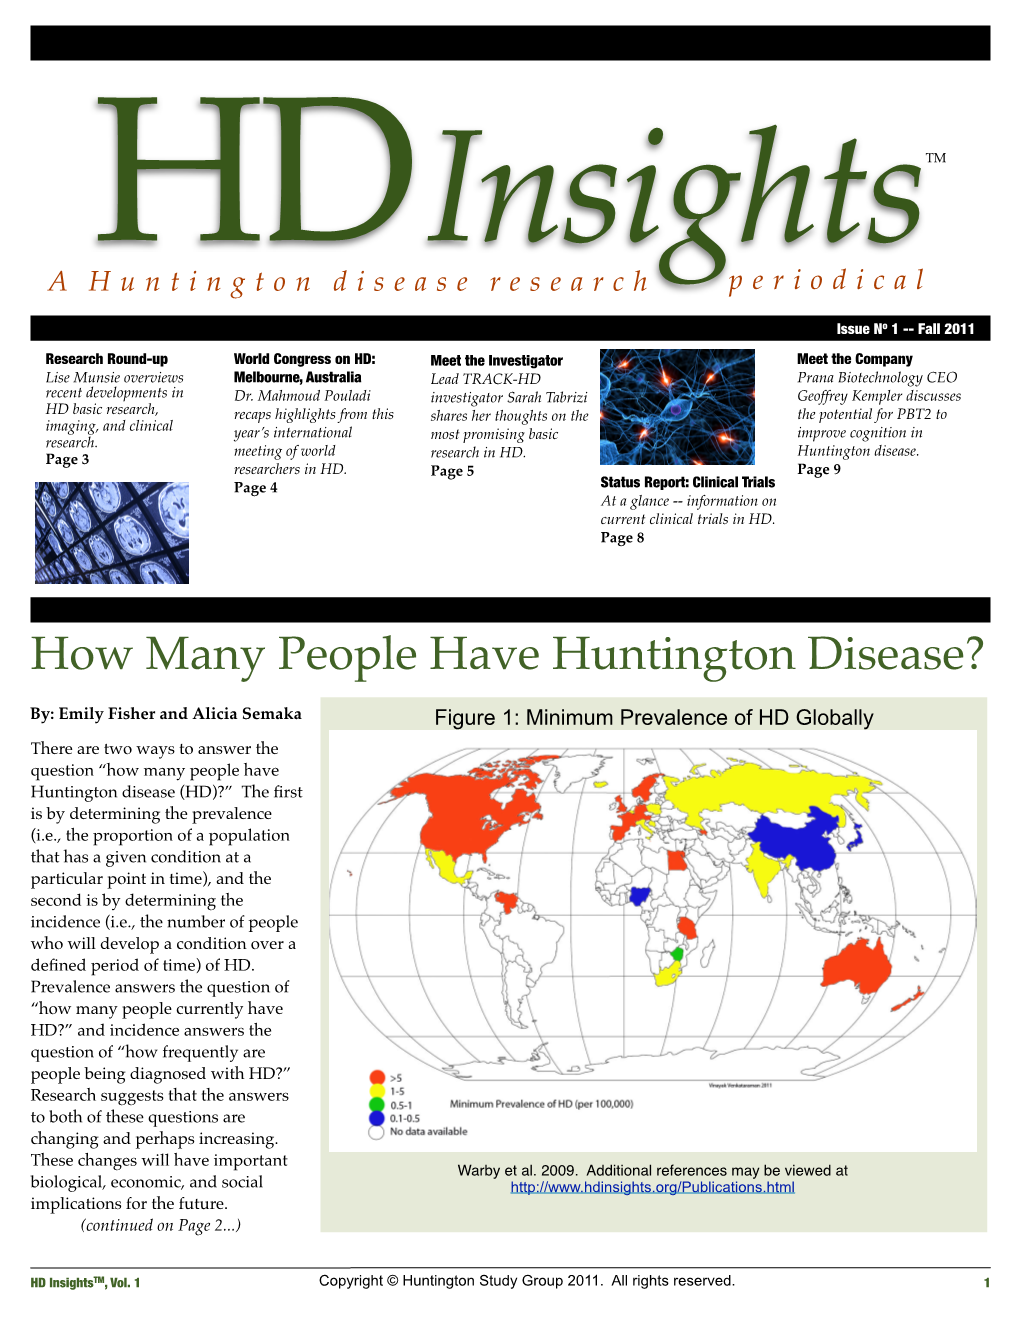 How Many People Have Huntington Disease?